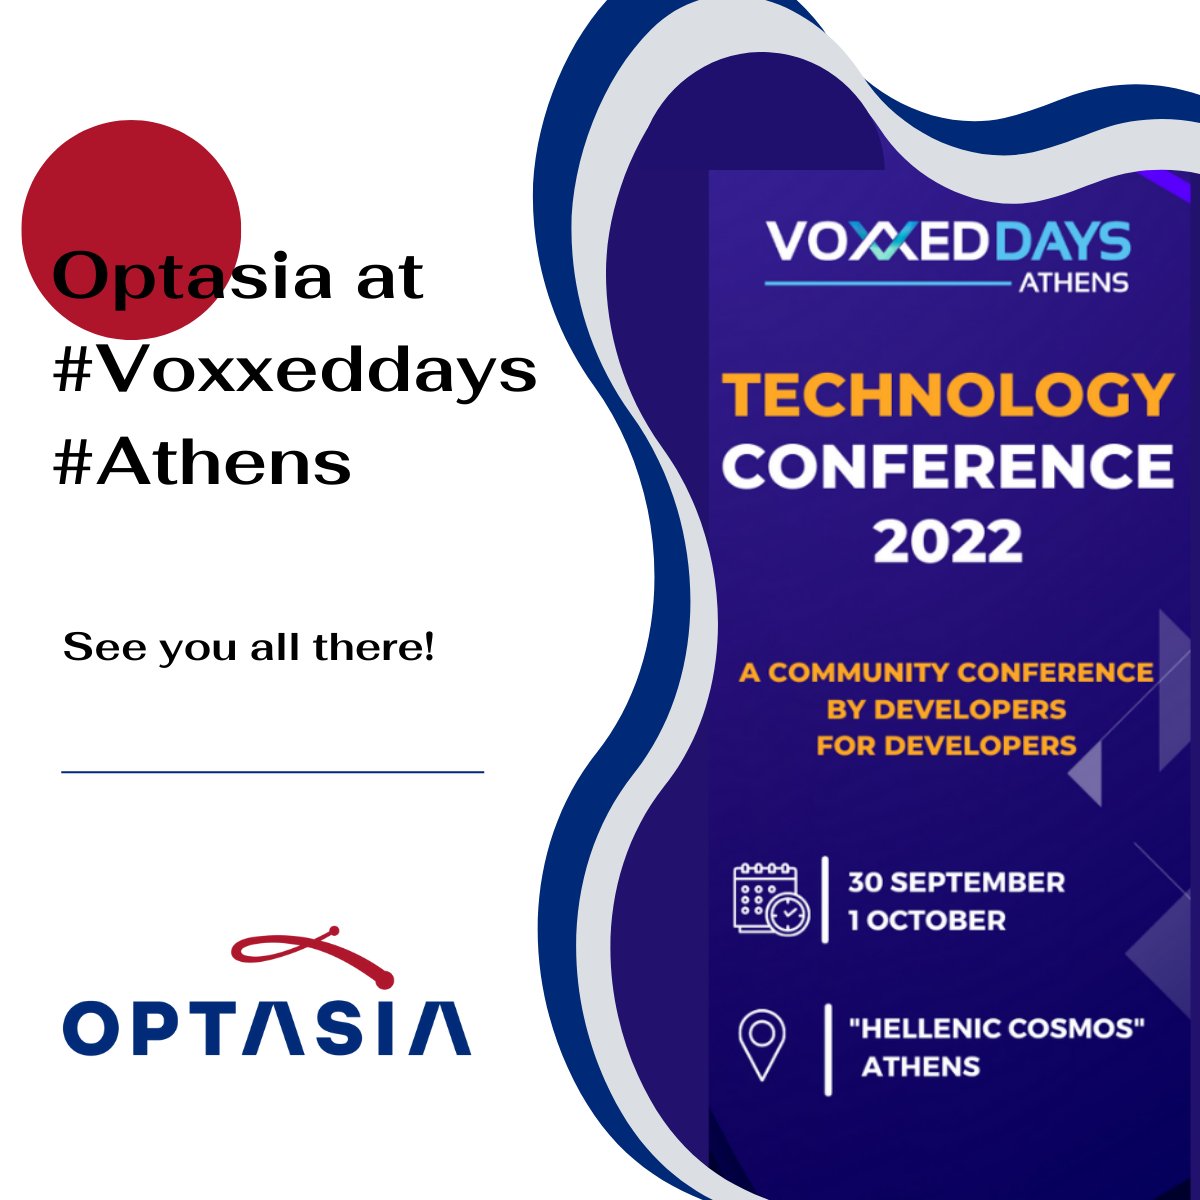 Countdown has begun for the #Voxxeddays #Athens' event. As a proud sponsor Optasia will be there to welcome you all at our booth!
Secure your spot and come meet us to catch a glimpse of all the techy, interesting, and exciting things we will present to you!
#vdathens2022